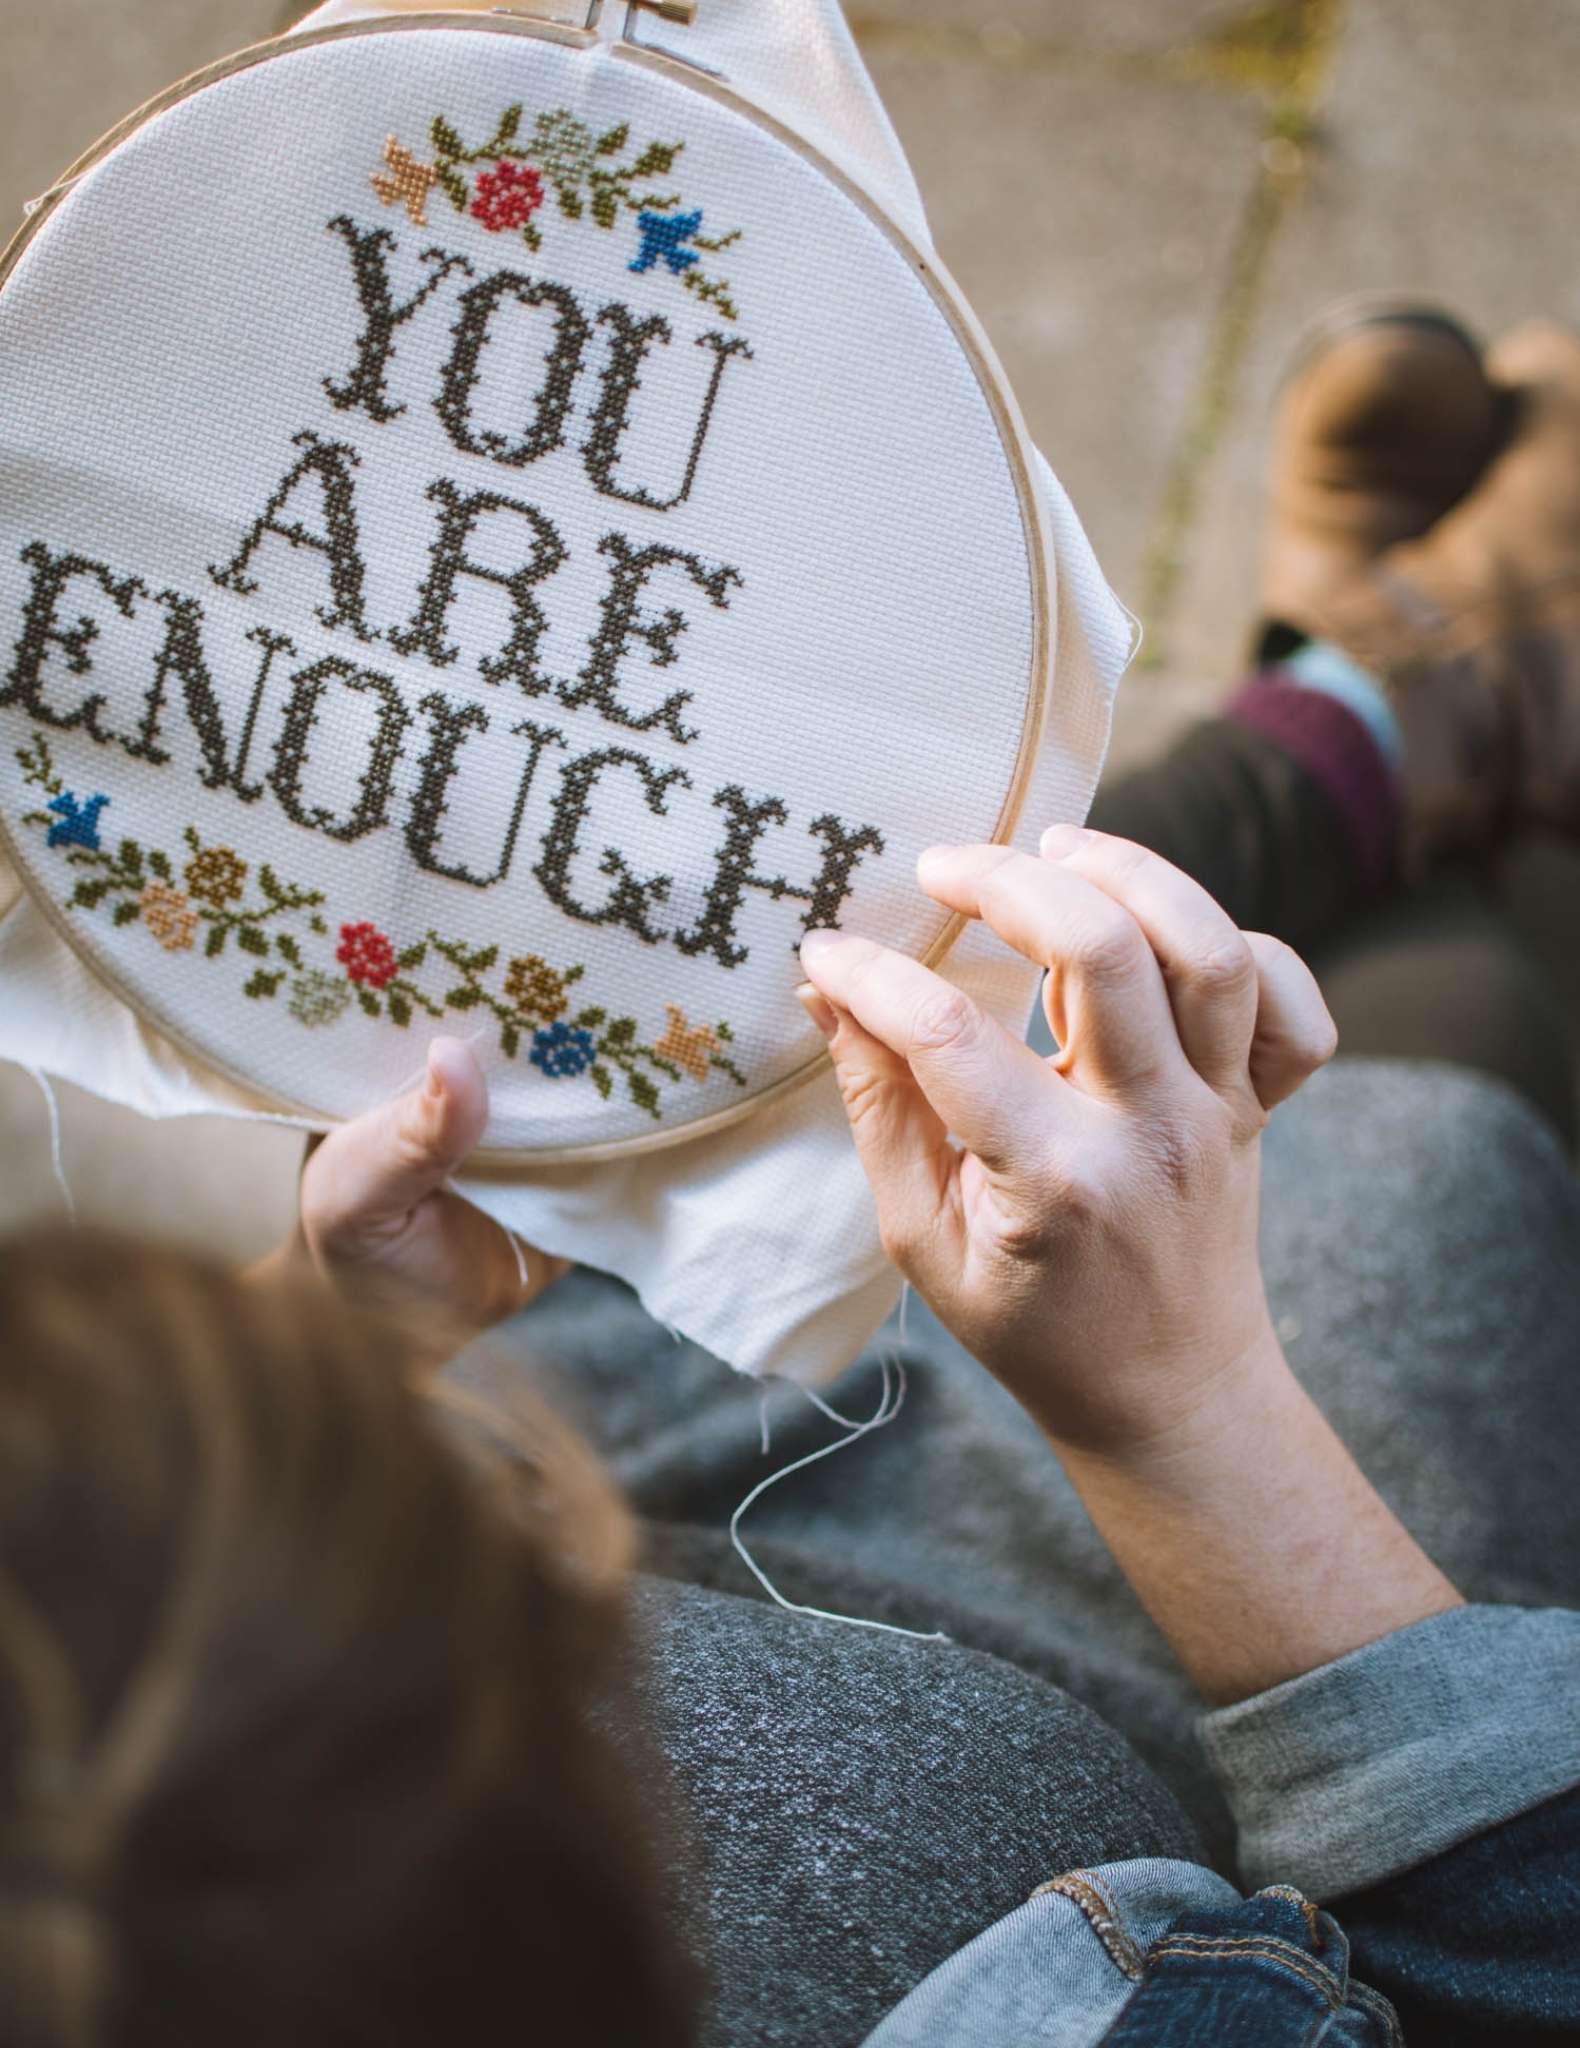 A white model with brown hair embroiders a cross stitch piece in a hoop showing the text 'You are Enough'